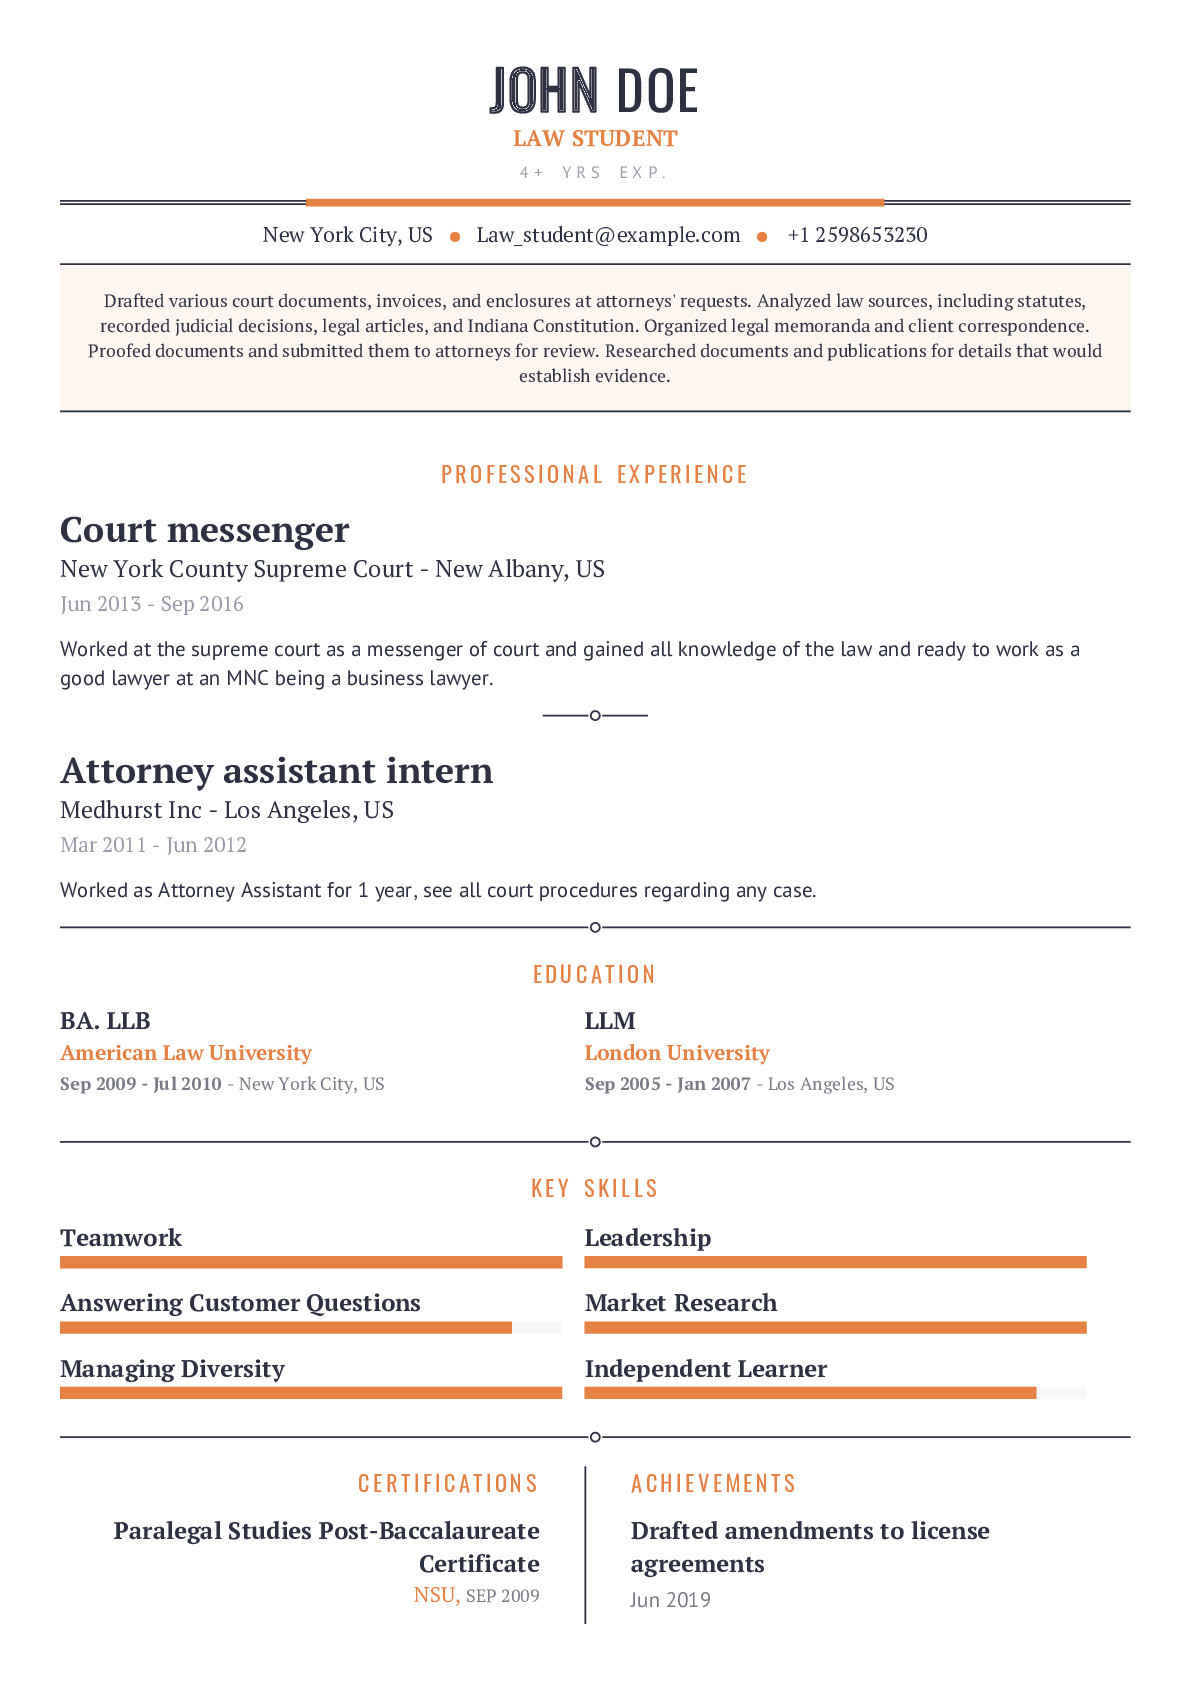 Sample Resume for Internship In Law Firm Law Student Resume Example with Content Sample Craftmycv